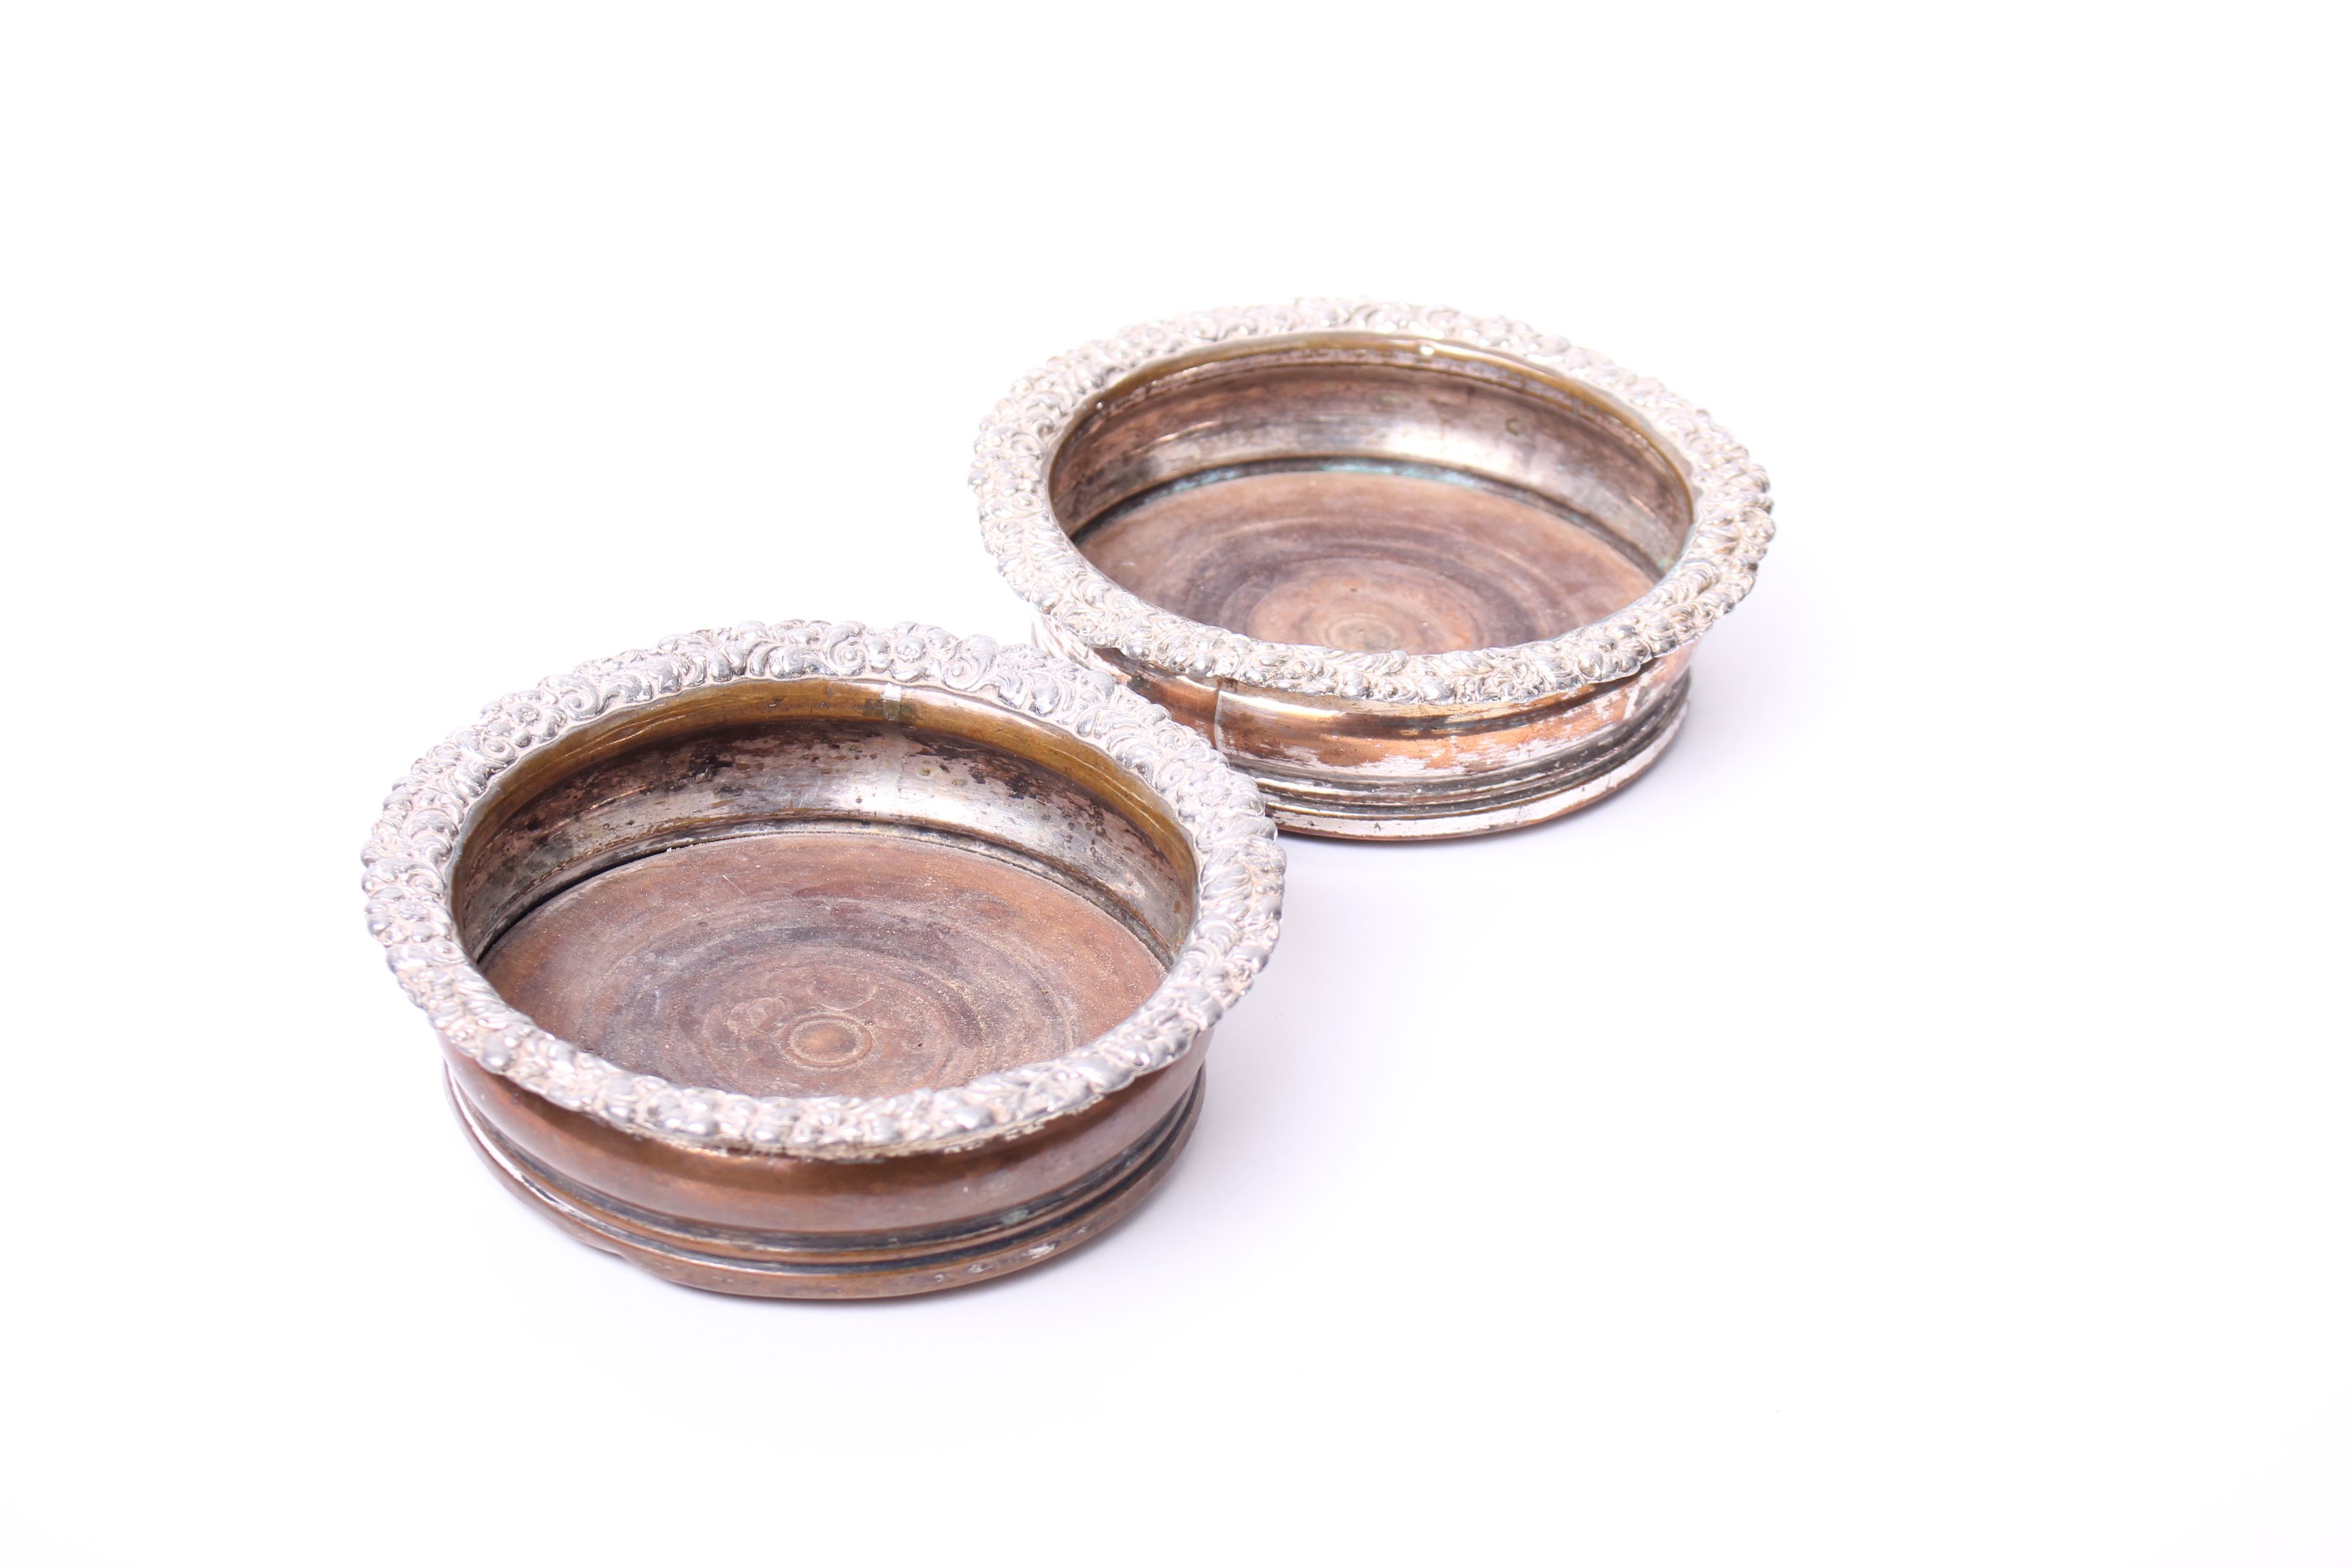 A pair of silver plated wine bottle coasters, with raised floral rim and turned wooden bases, a pair